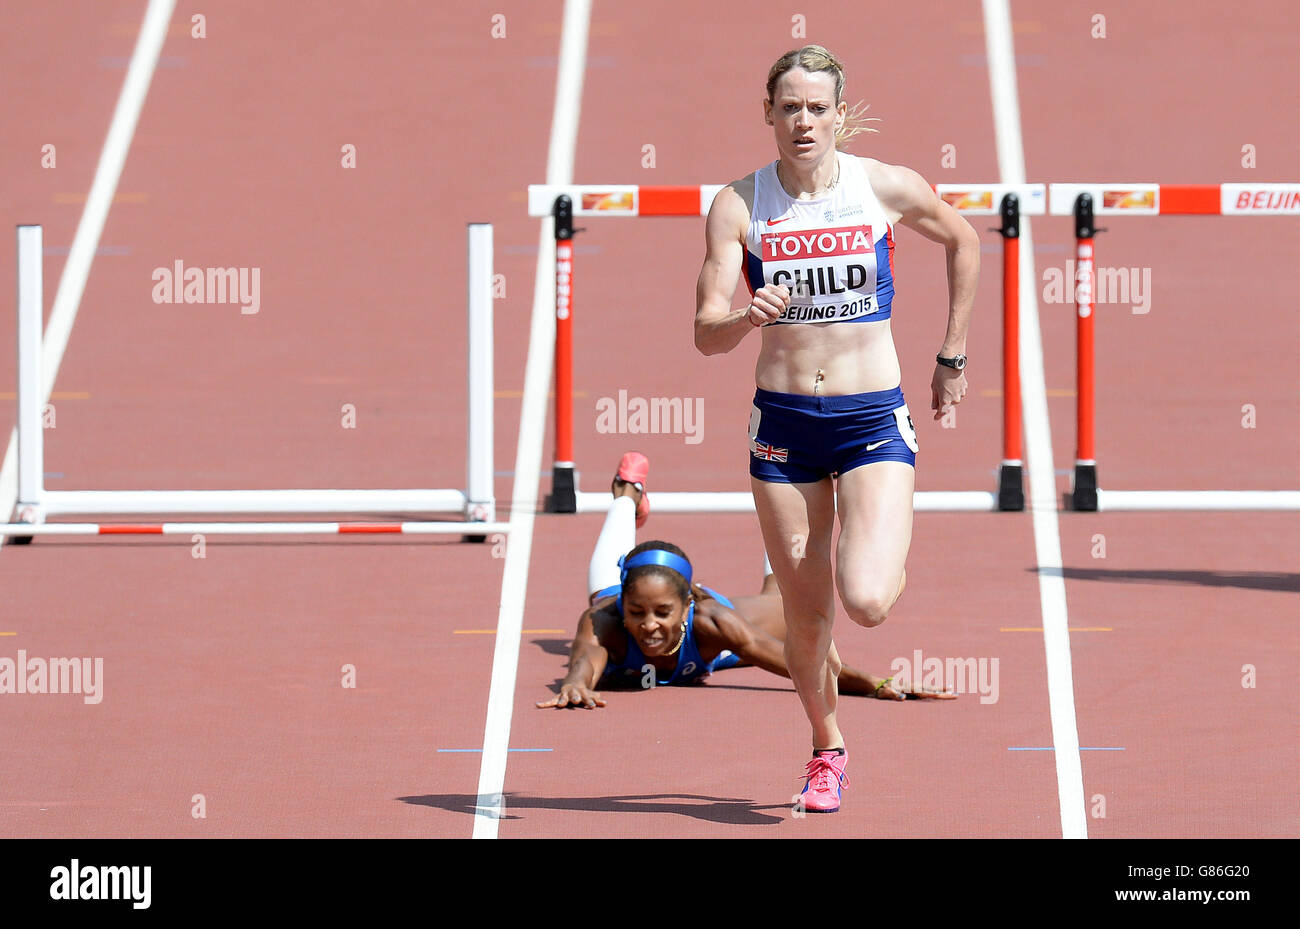 Great Britian's Eilidh Child sprints for the line as Italy's Yadisleidis Pedroso falls after hitting the final hurdle, in heat 2 of the Women's 400m Hurdles, during day two of the IAAF World Championships at the Beijing National Stadium, China. Stock Photo